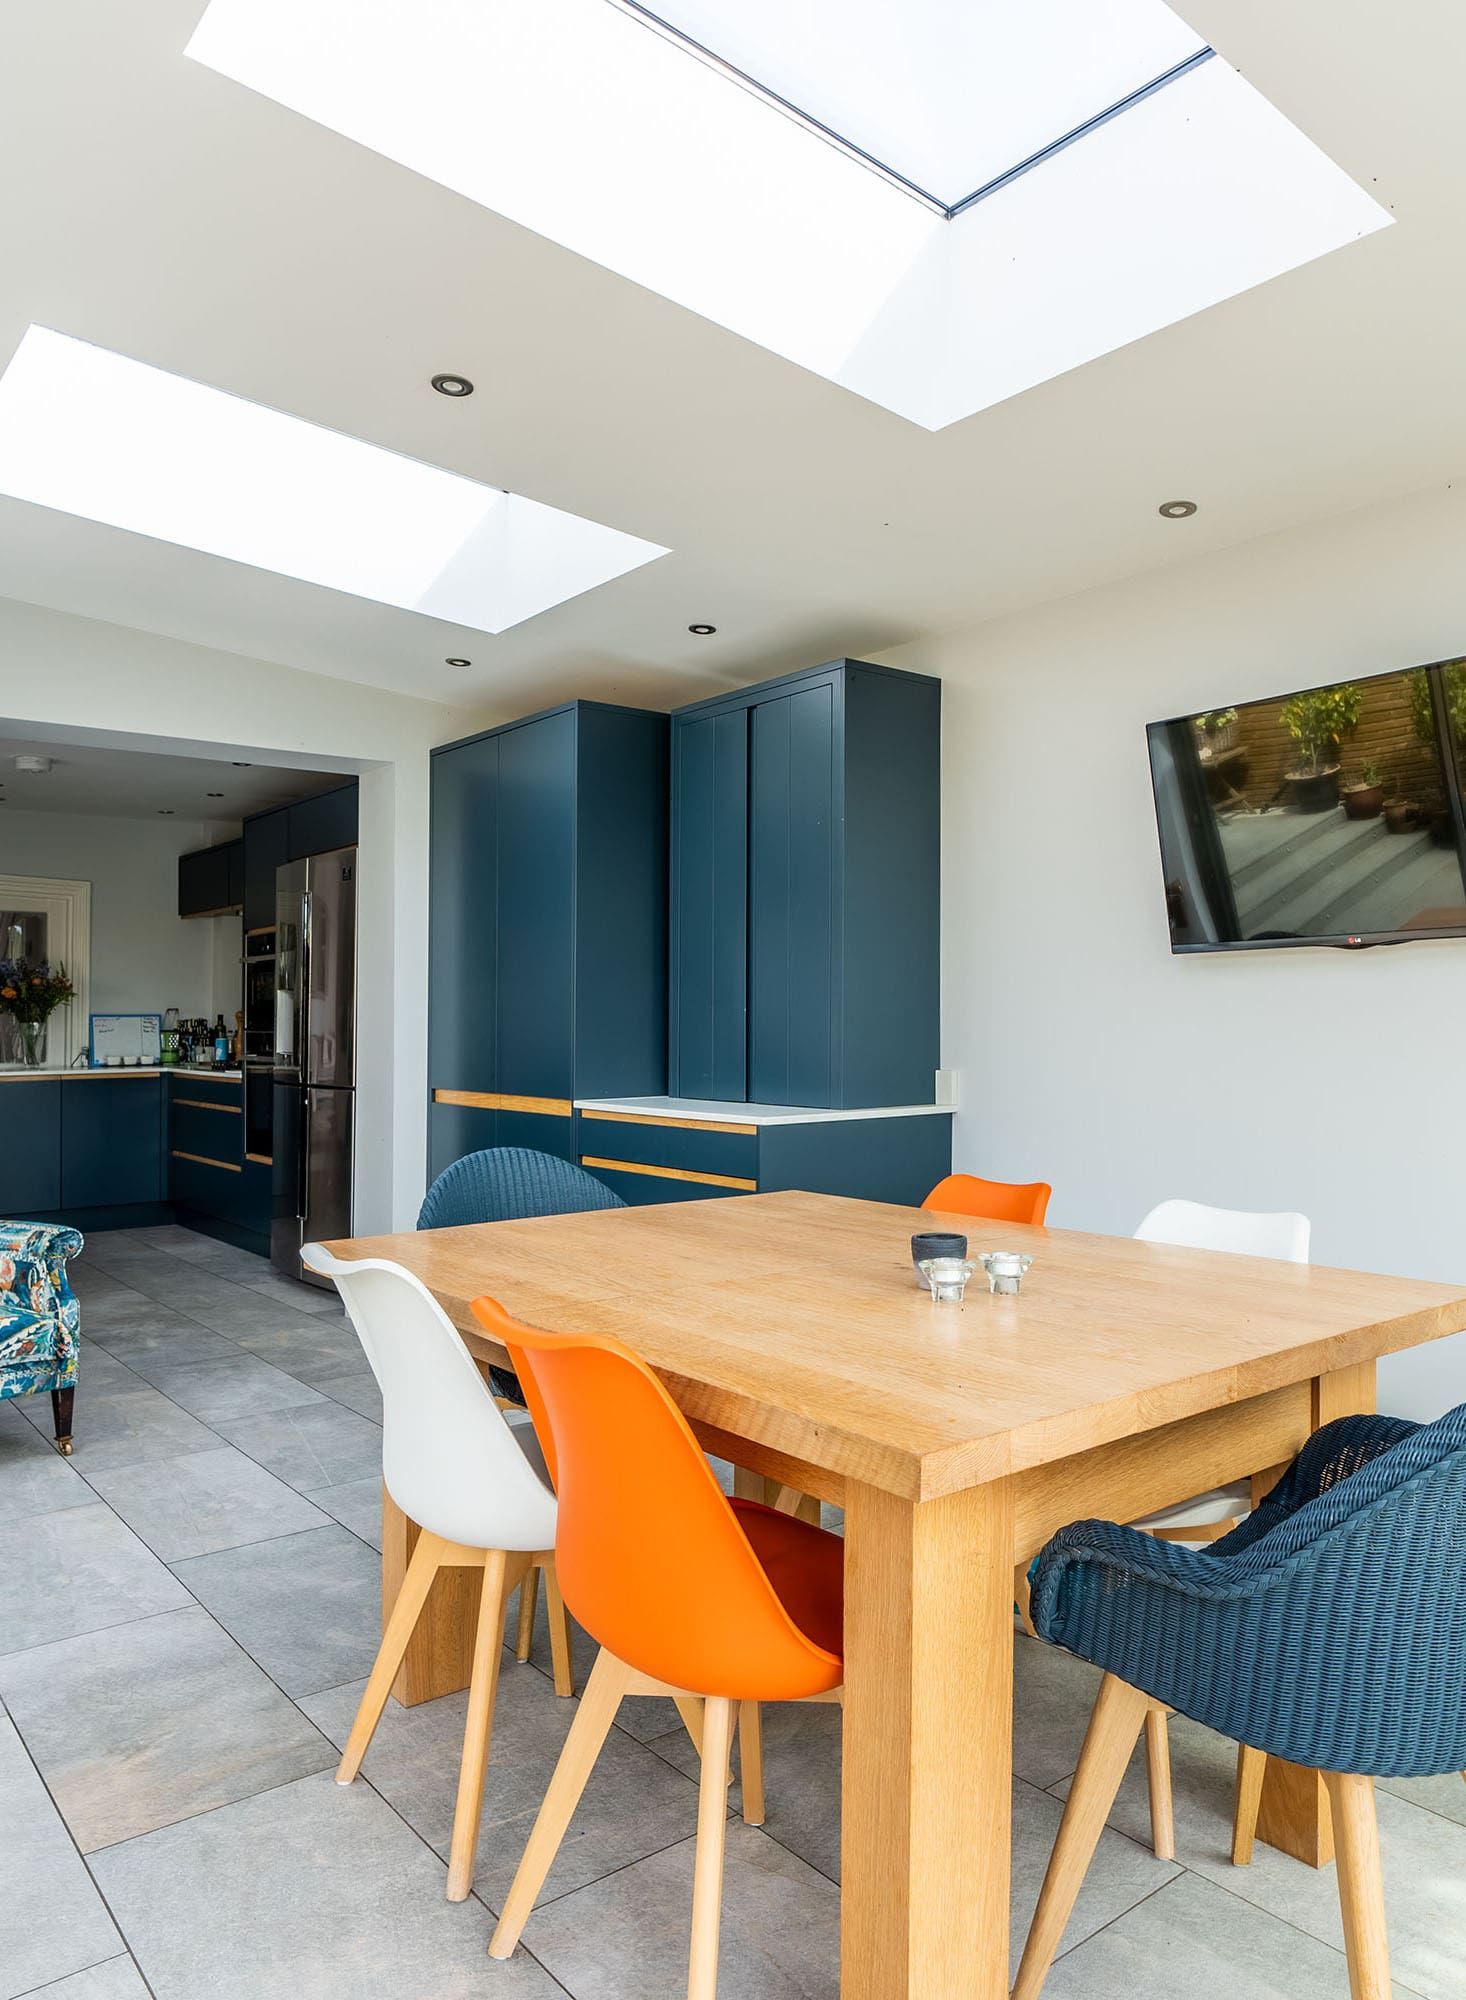 Interior of a modern kitchen diner extension with sliding glass doors and roof lantern.